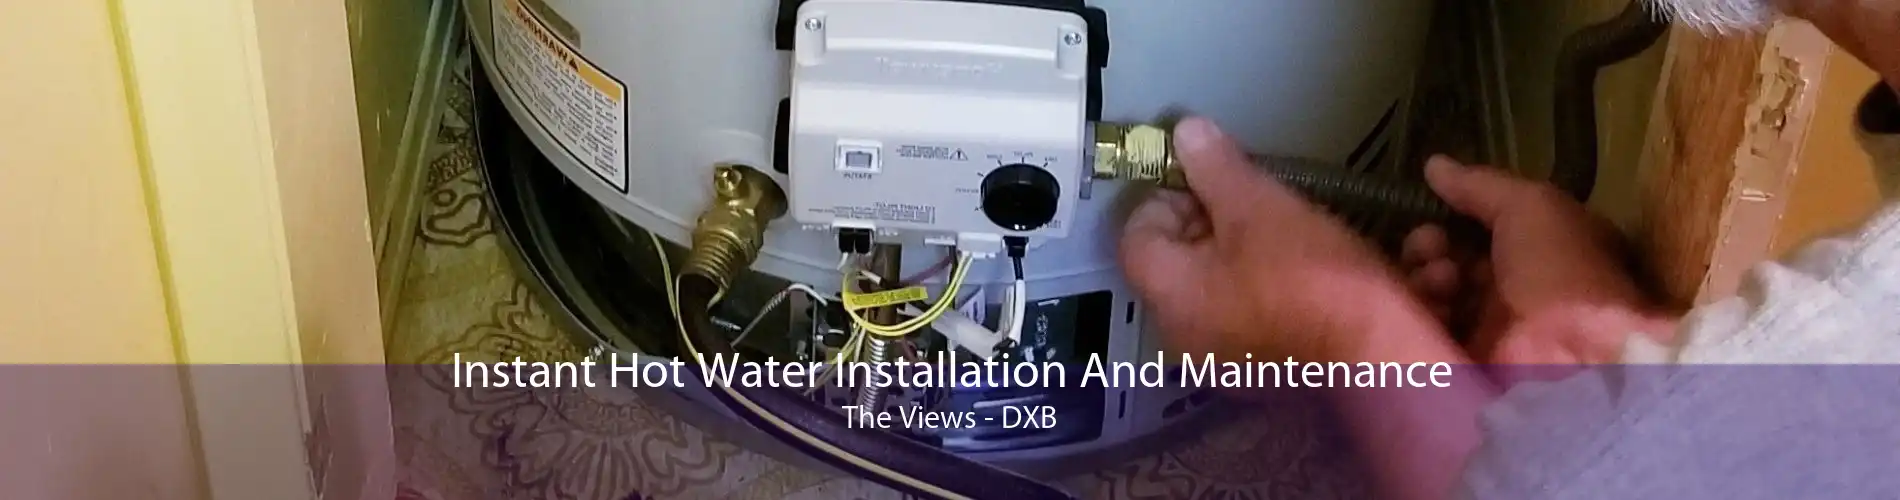 Instant Hot Water Installation And Maintenance The Views - DXB